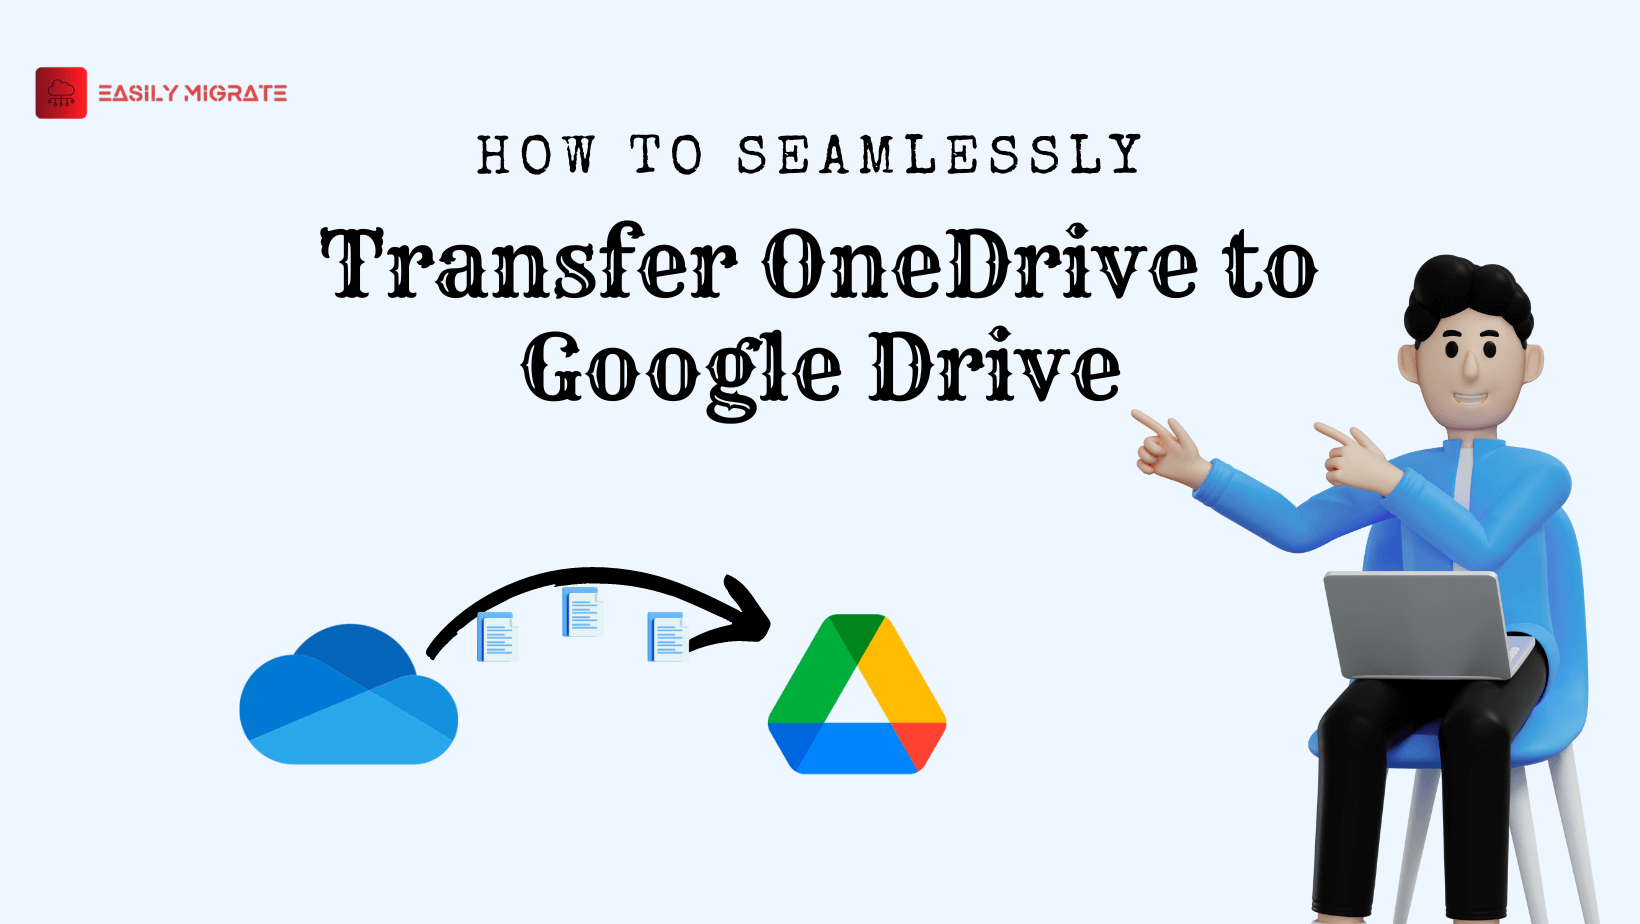 How to Seamlessly Transfer OneDrive to Google Drive